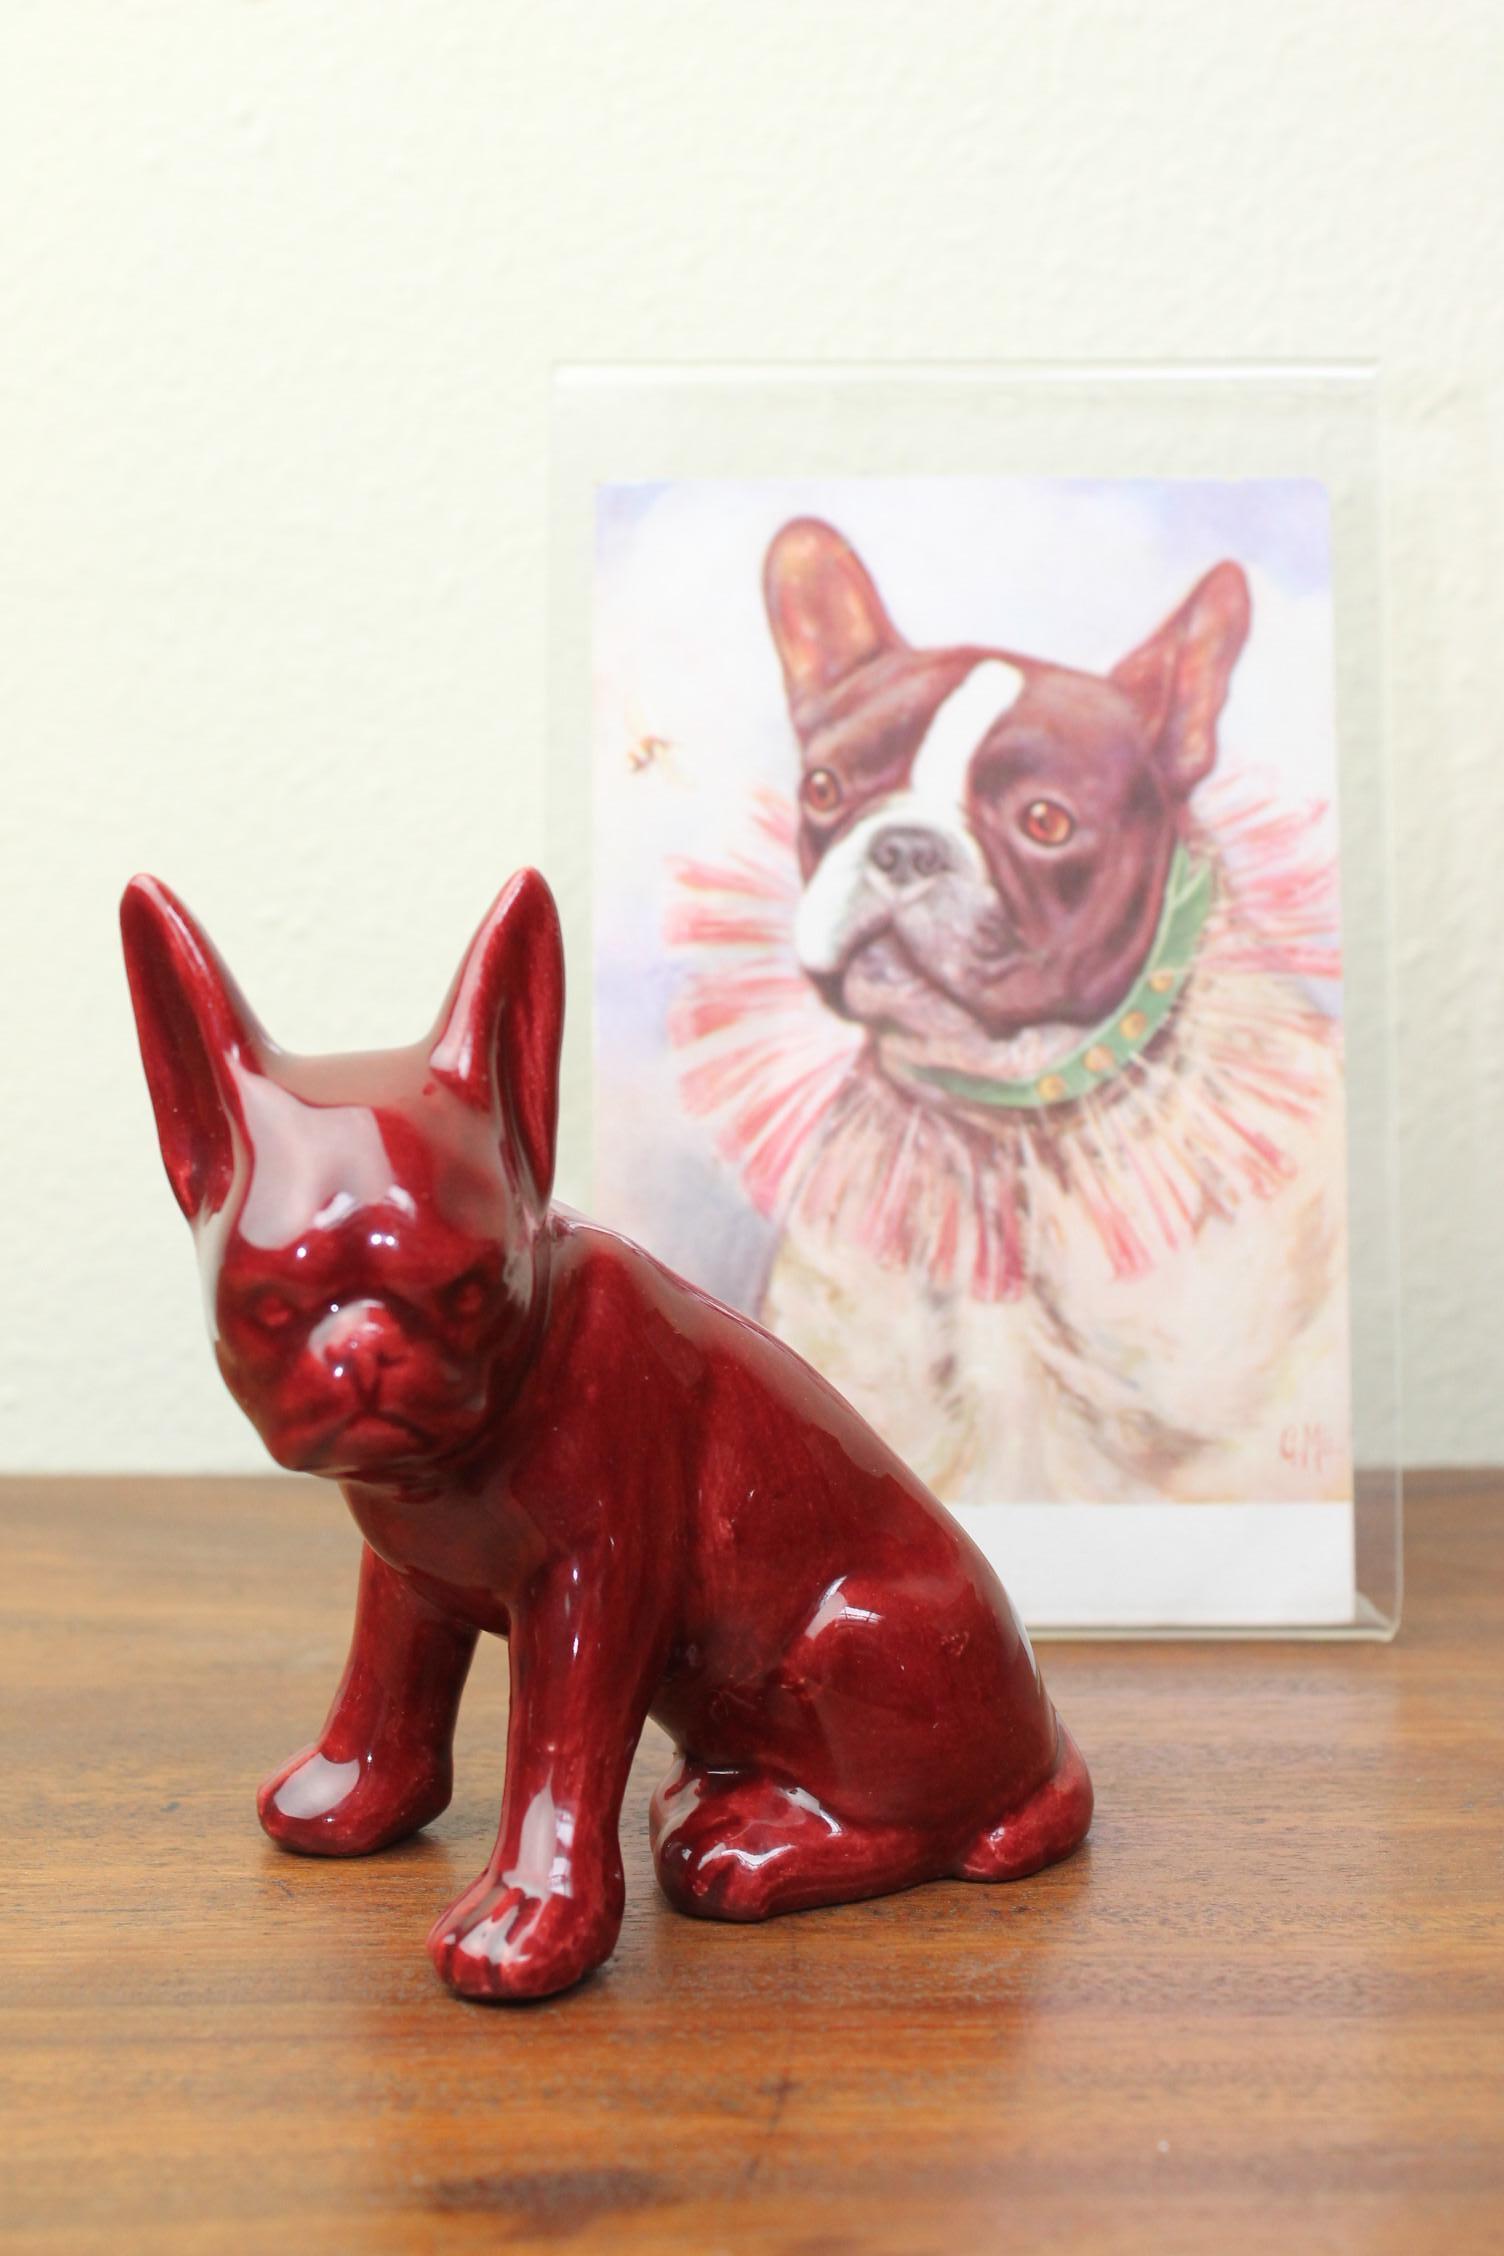 Vintage red-Bordeaux French bulldog figurine.
This dog statue is special because of his red-Bordeaux color, which you do not see often.
He was added in the late 1950s to his former owner collection, but he could even be a little older (1930-1940)